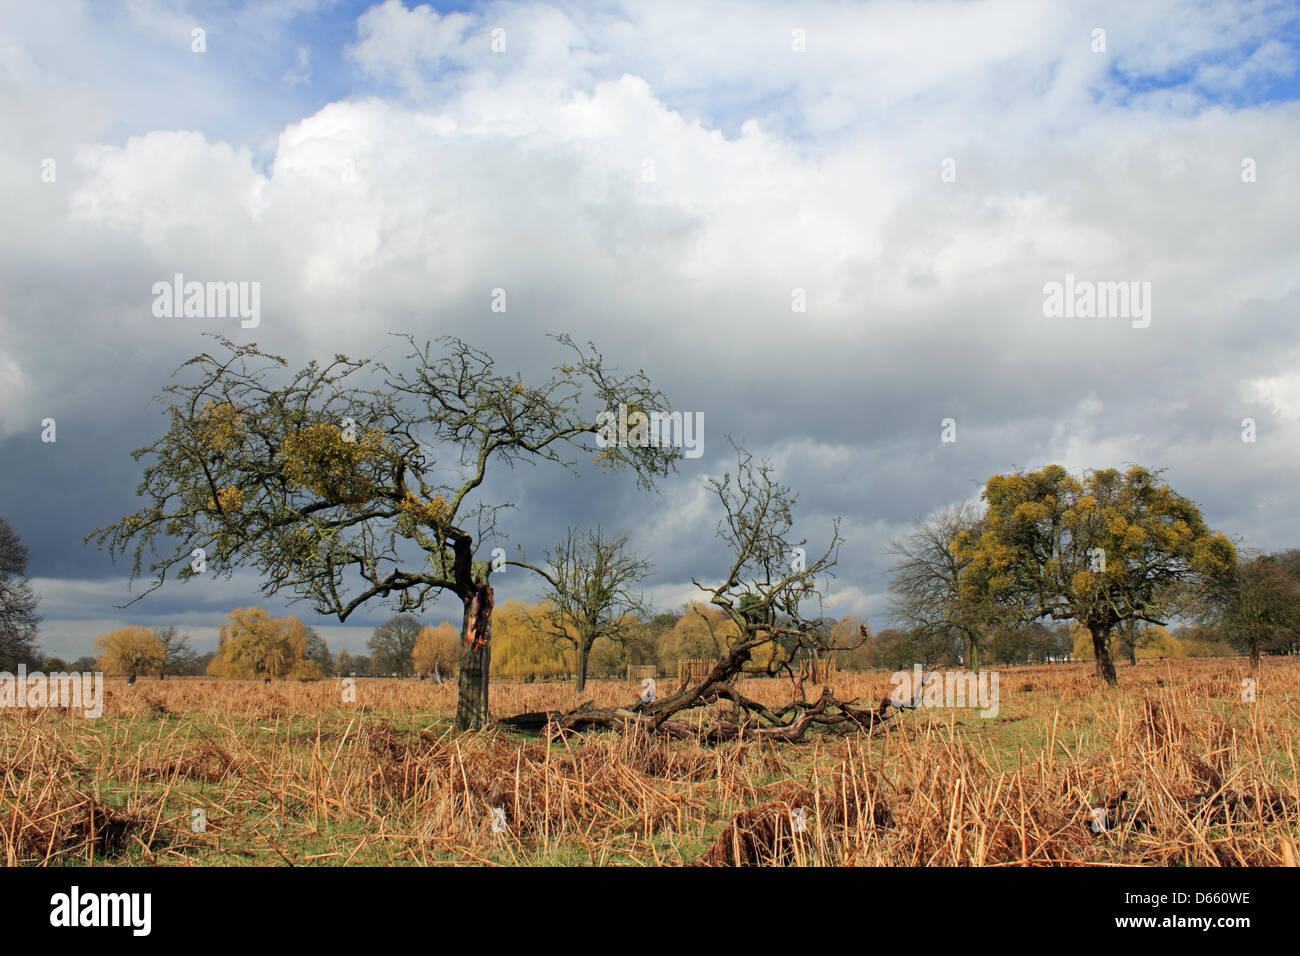 Bushy Park, SW London, England, UK.  12th April 2013. Stormy skies and heavy showers were the latest weather conditions in Southern England today. This tree had a broken branch from recent high winds. Credit: Julia Gavin / Alamy Live News Stock Photo